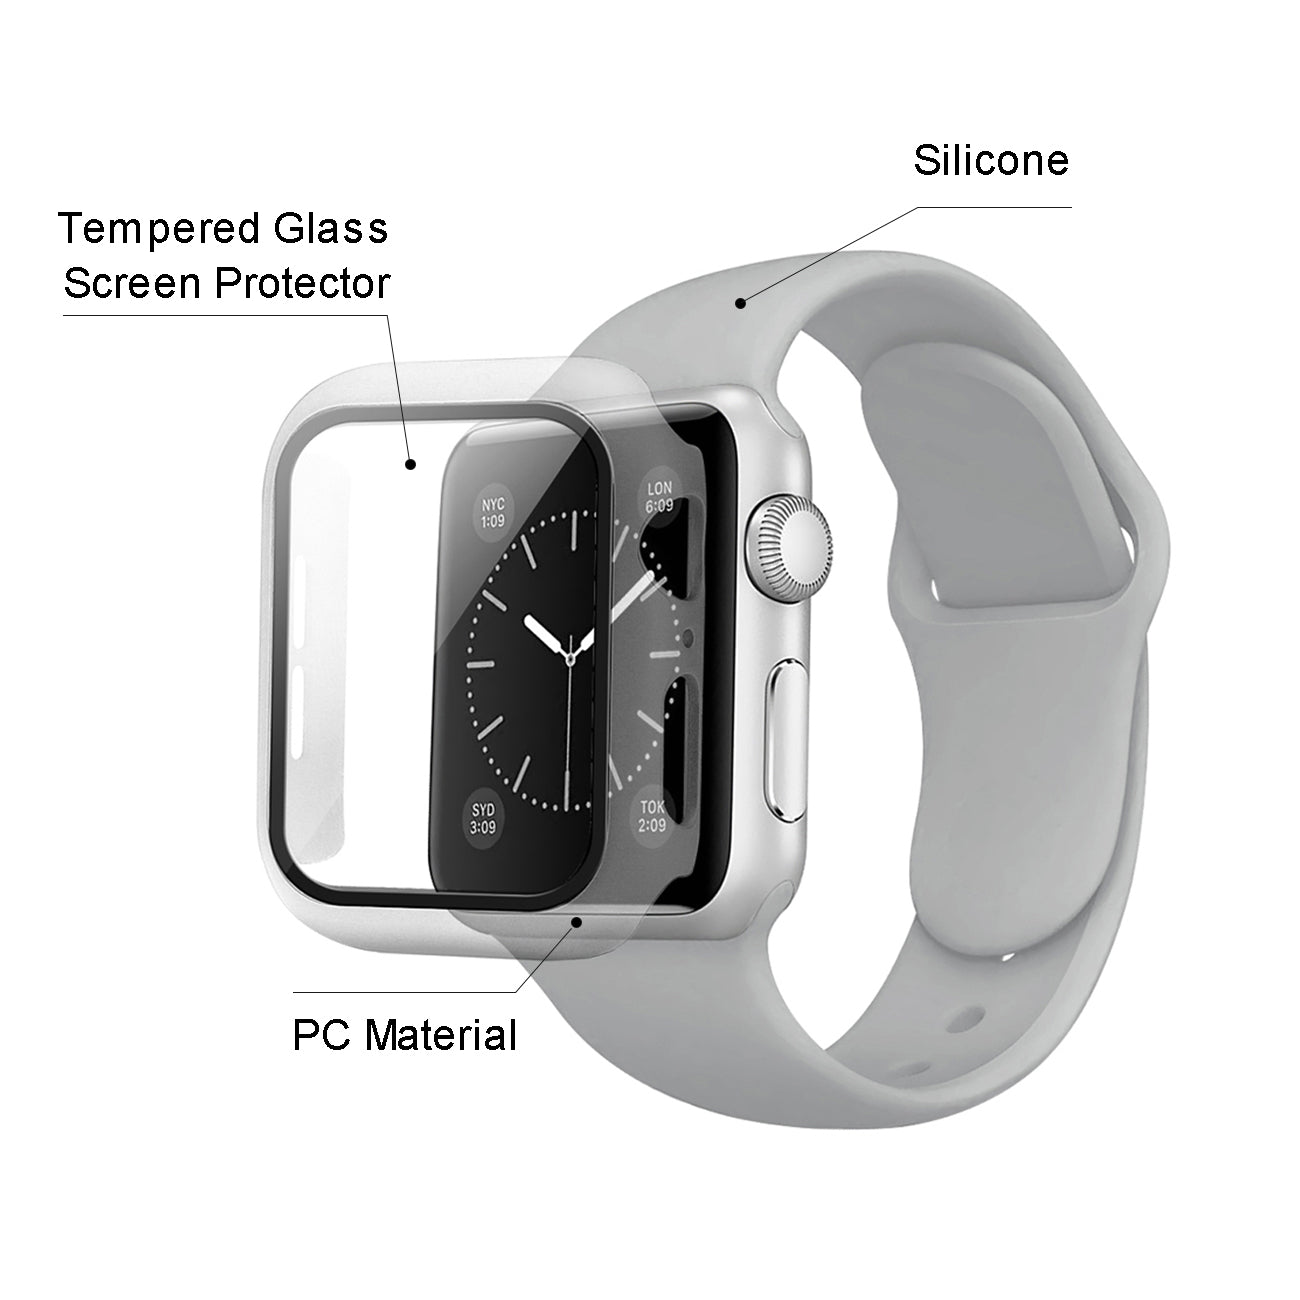 Watch Case PC With Glass Screen Protector, Silicone Watch Band Apple Watch 42mm Gray Color